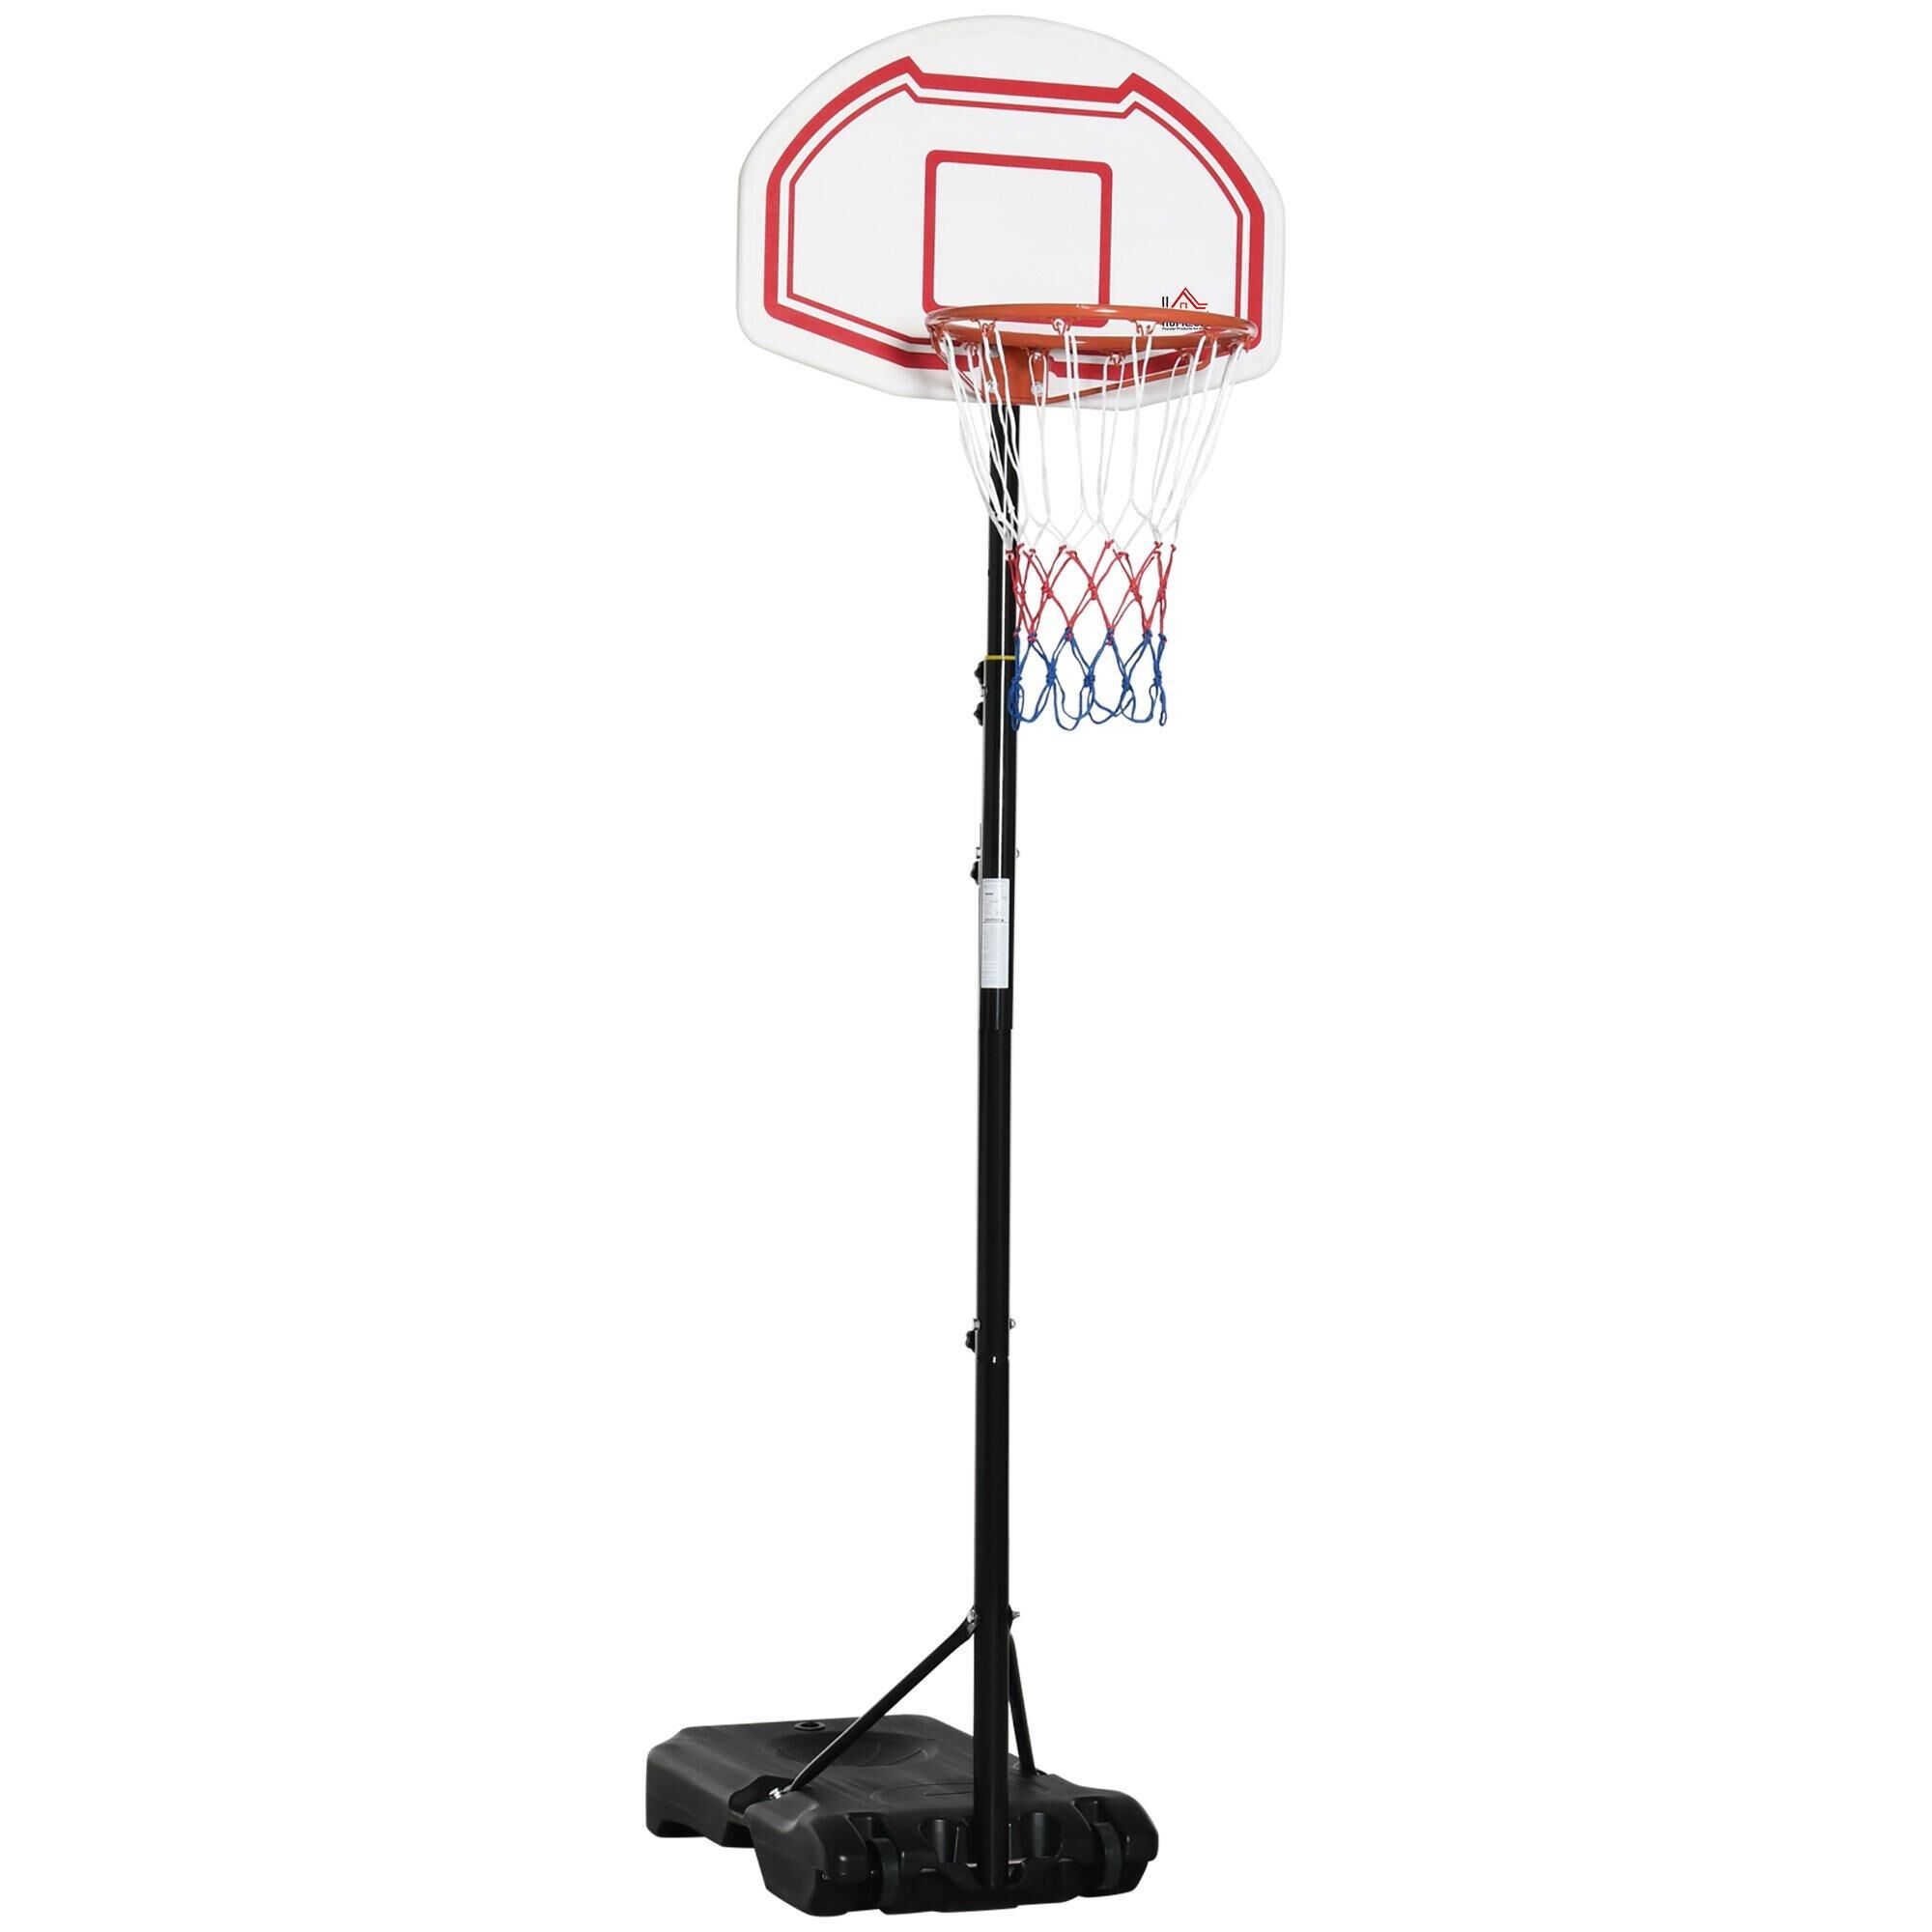 HOMCOM Outdoor Adjustable Basketball Hoop Stand with Wheels and Stable Base